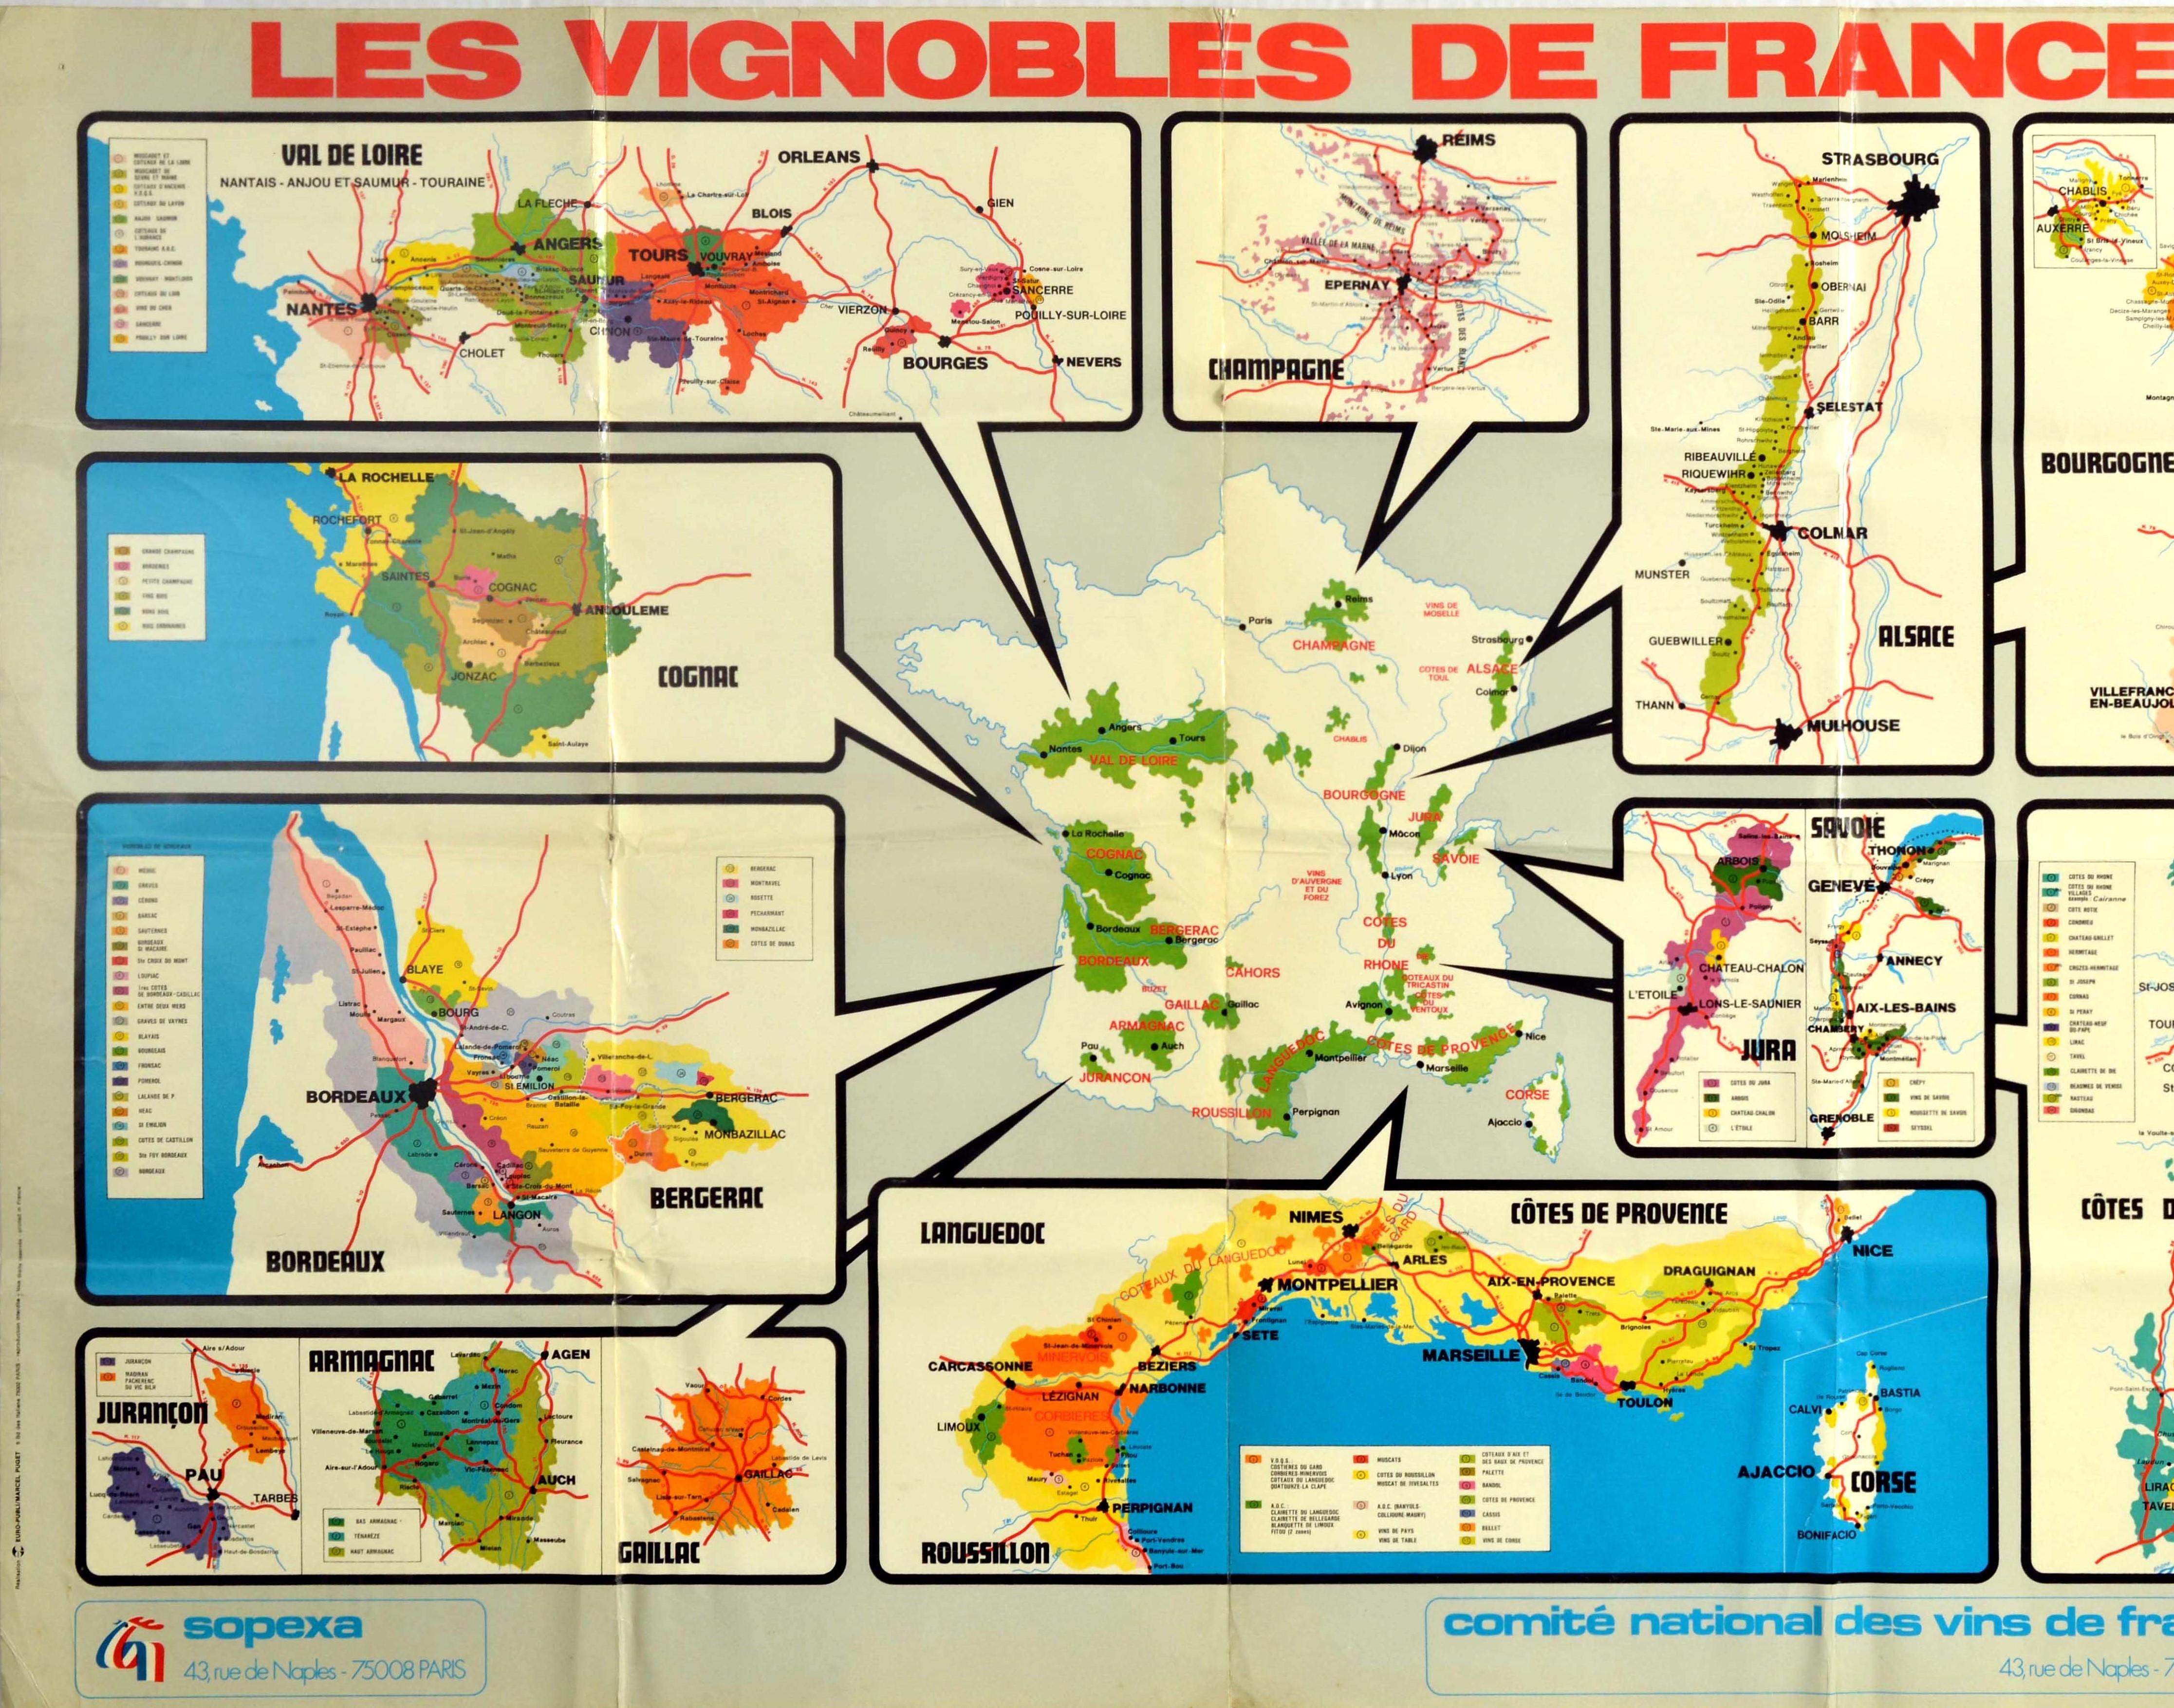 Original vintage advertising poster for Les Vignobles de France / The Vineyards of France issued by the National Committee of the Wines of France SOPEXA Comite Nationale de Vins de France featuring a map of France showing the major wine producing